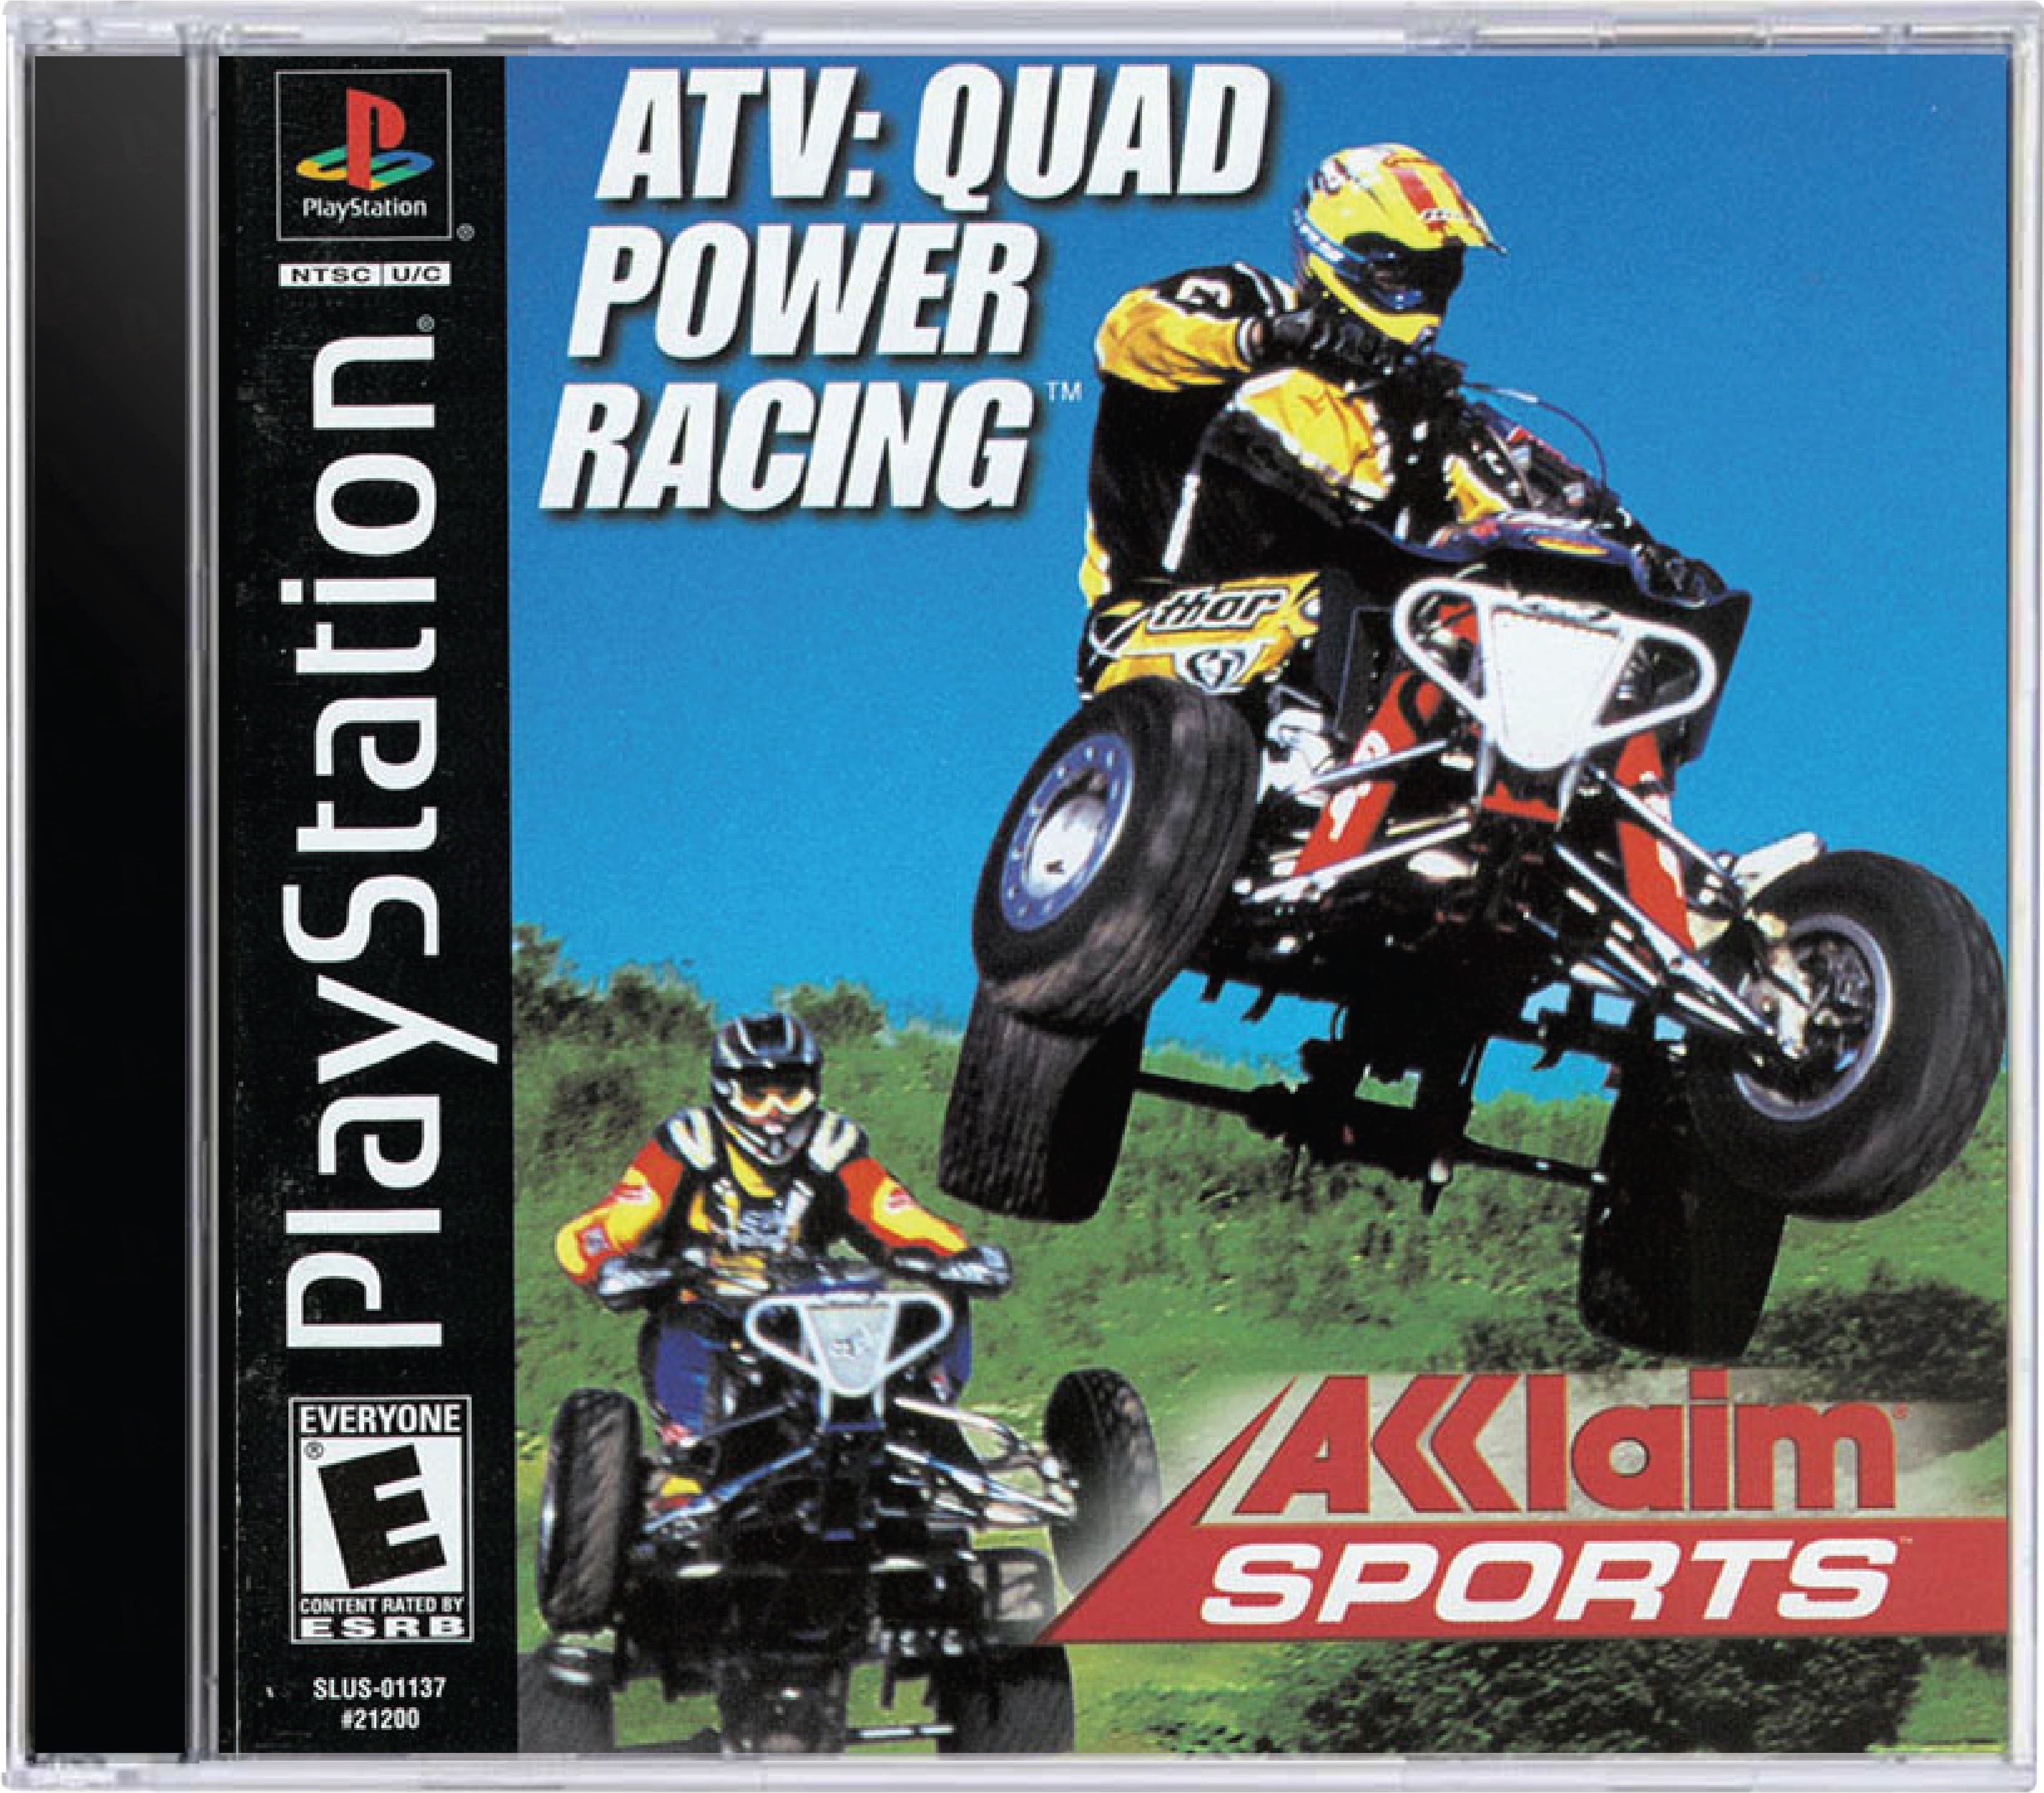 ATV Quad Power Racing Cover Art and Product Photo